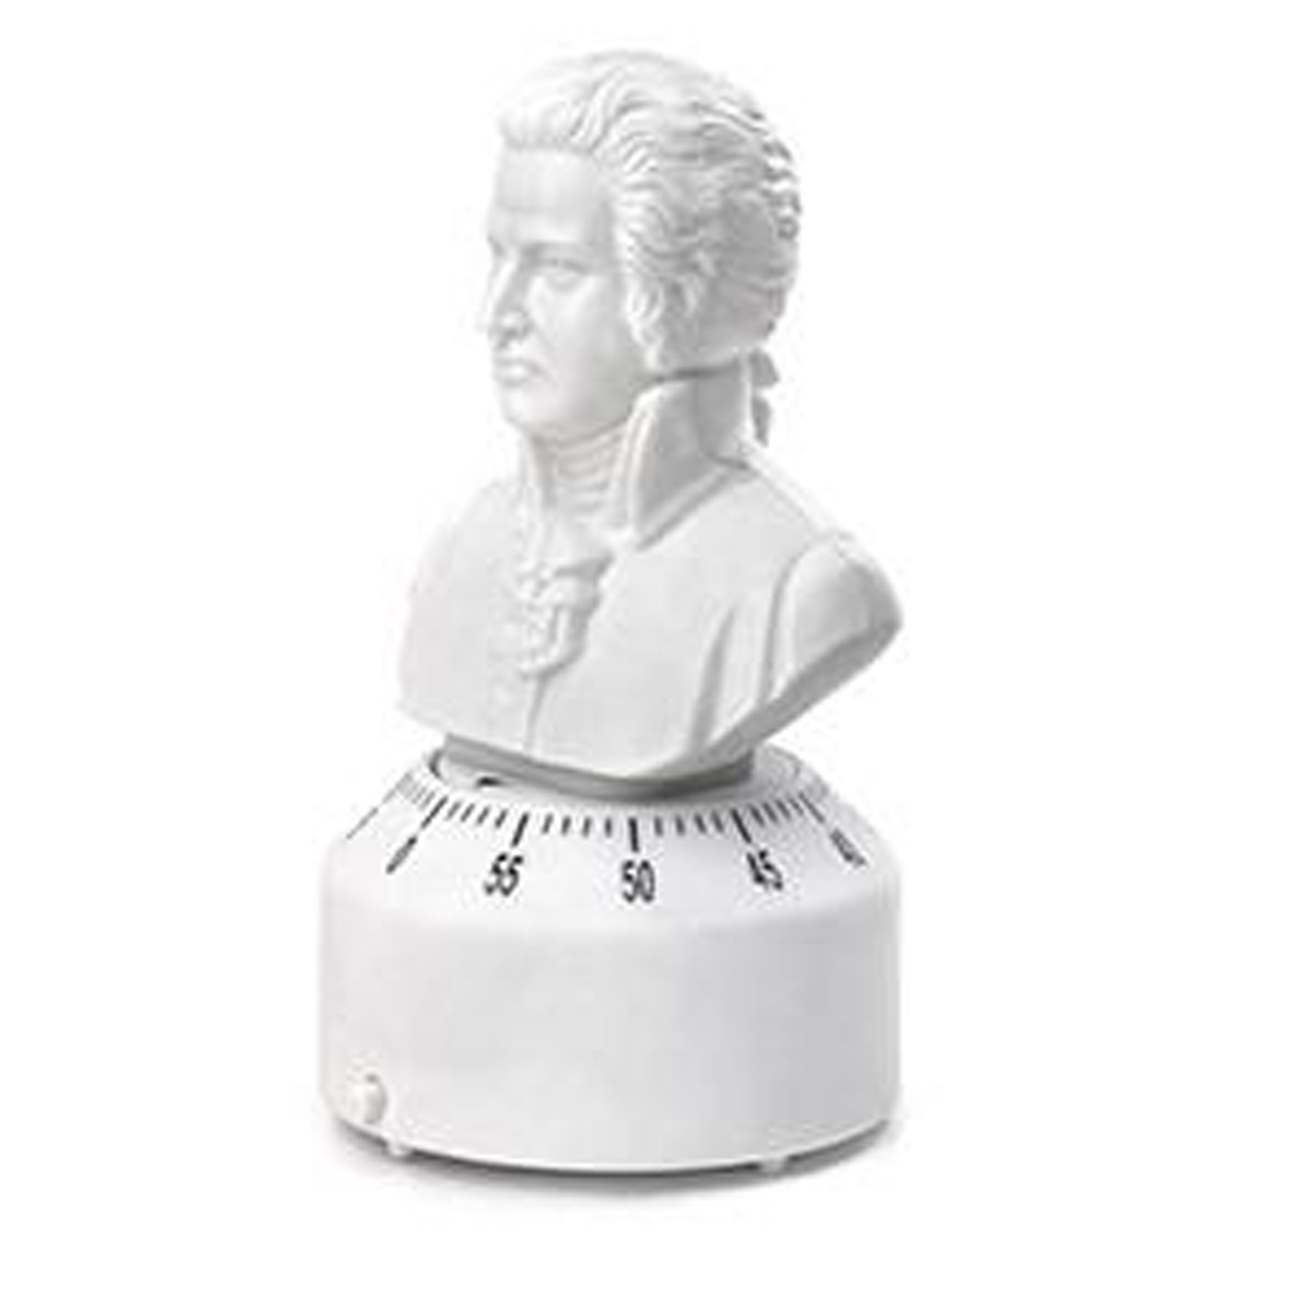 Mozart and Beethoven Kitchen Timers